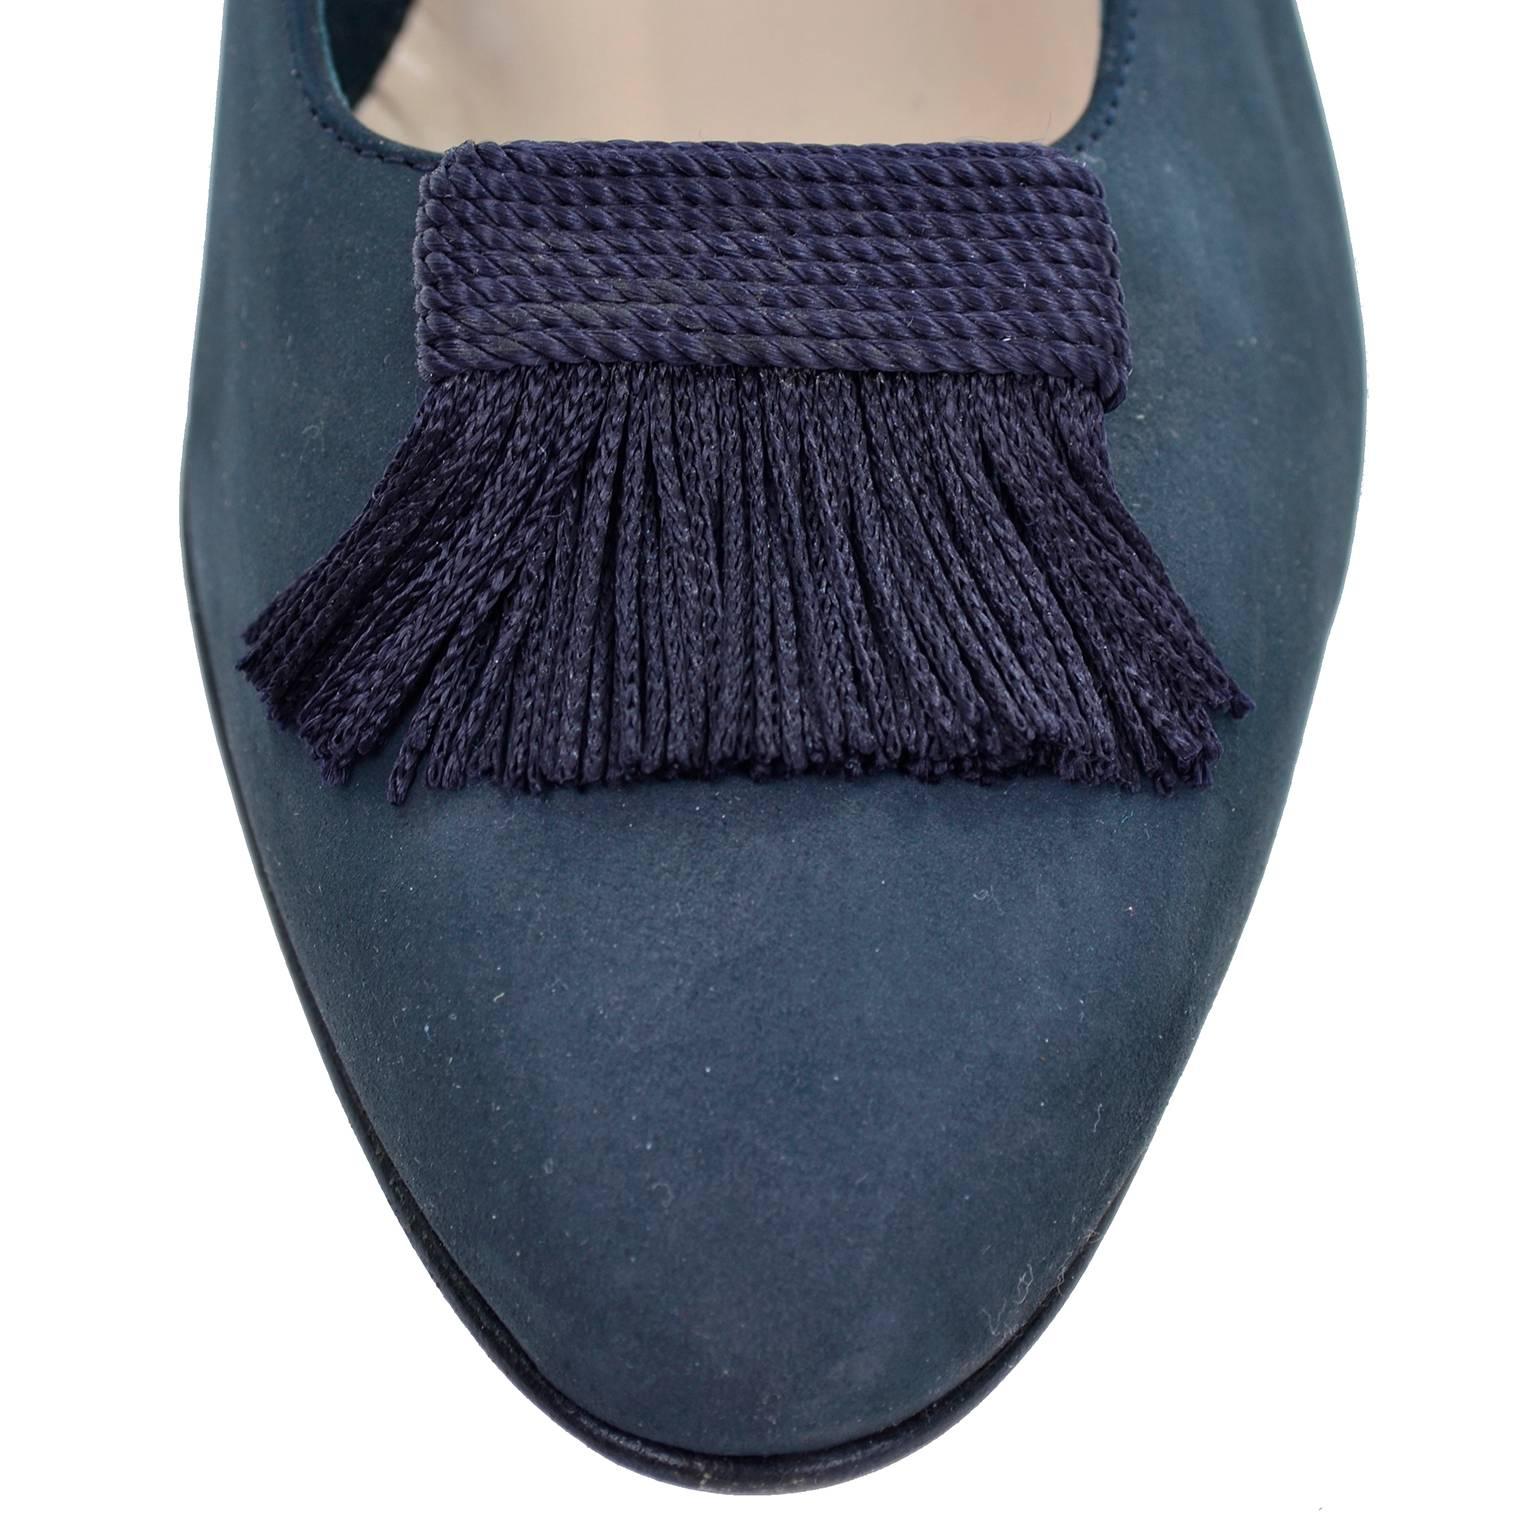 Black New Vintage Ferragamo Shoes in Navy Blue Suede with Fringed Tassels Size 8B